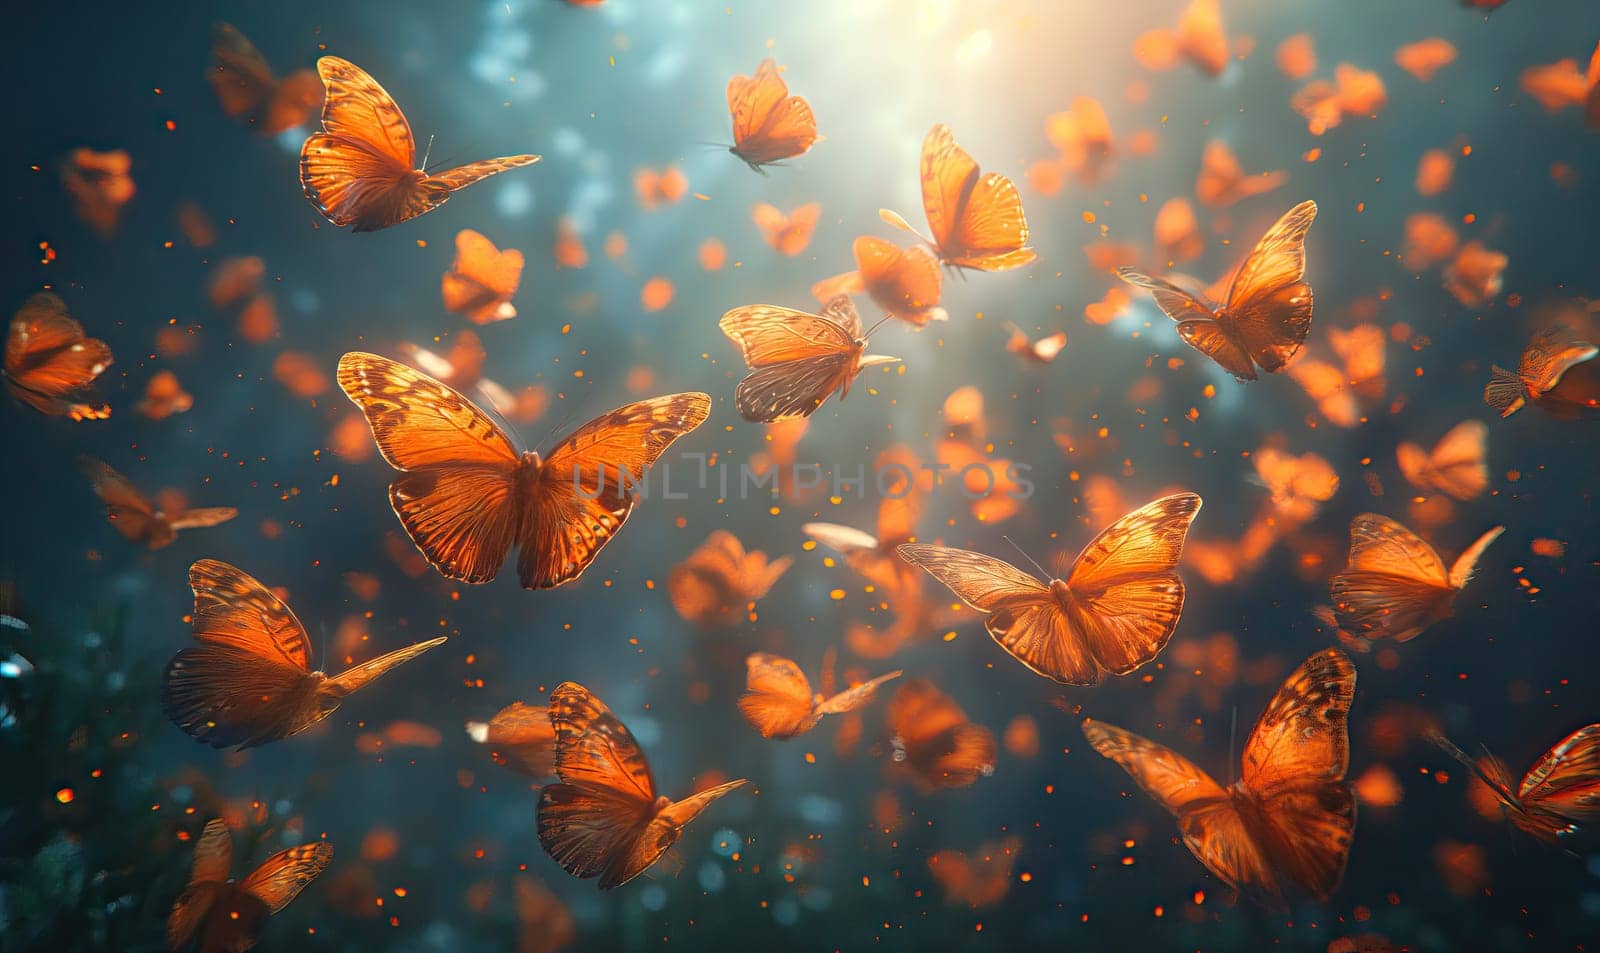 Colorful butterflies on a blurred natural background. by Fischeron